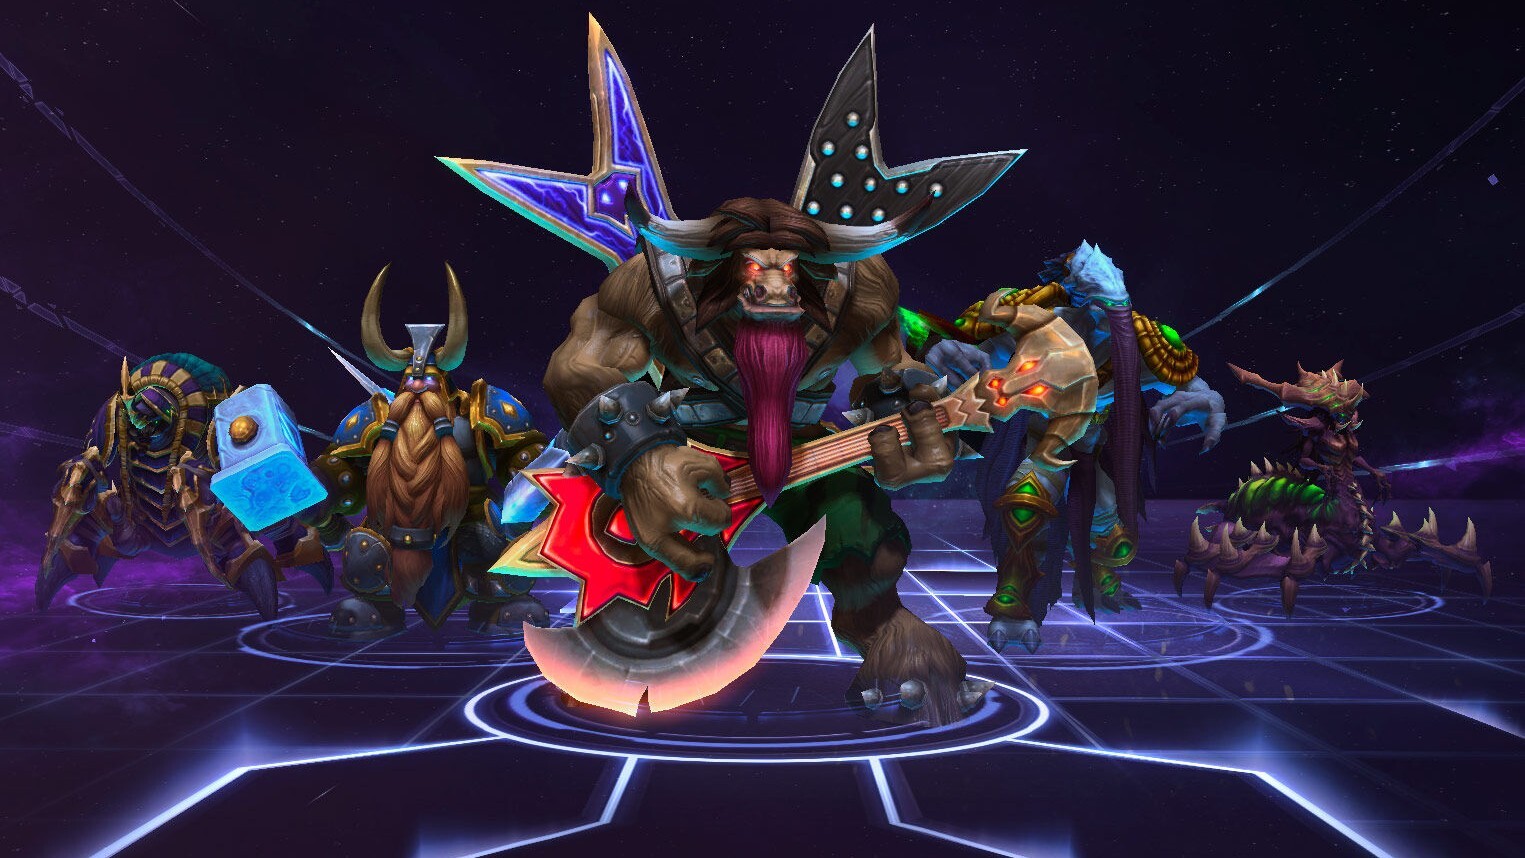 Thoughts: Heroes of the Storm